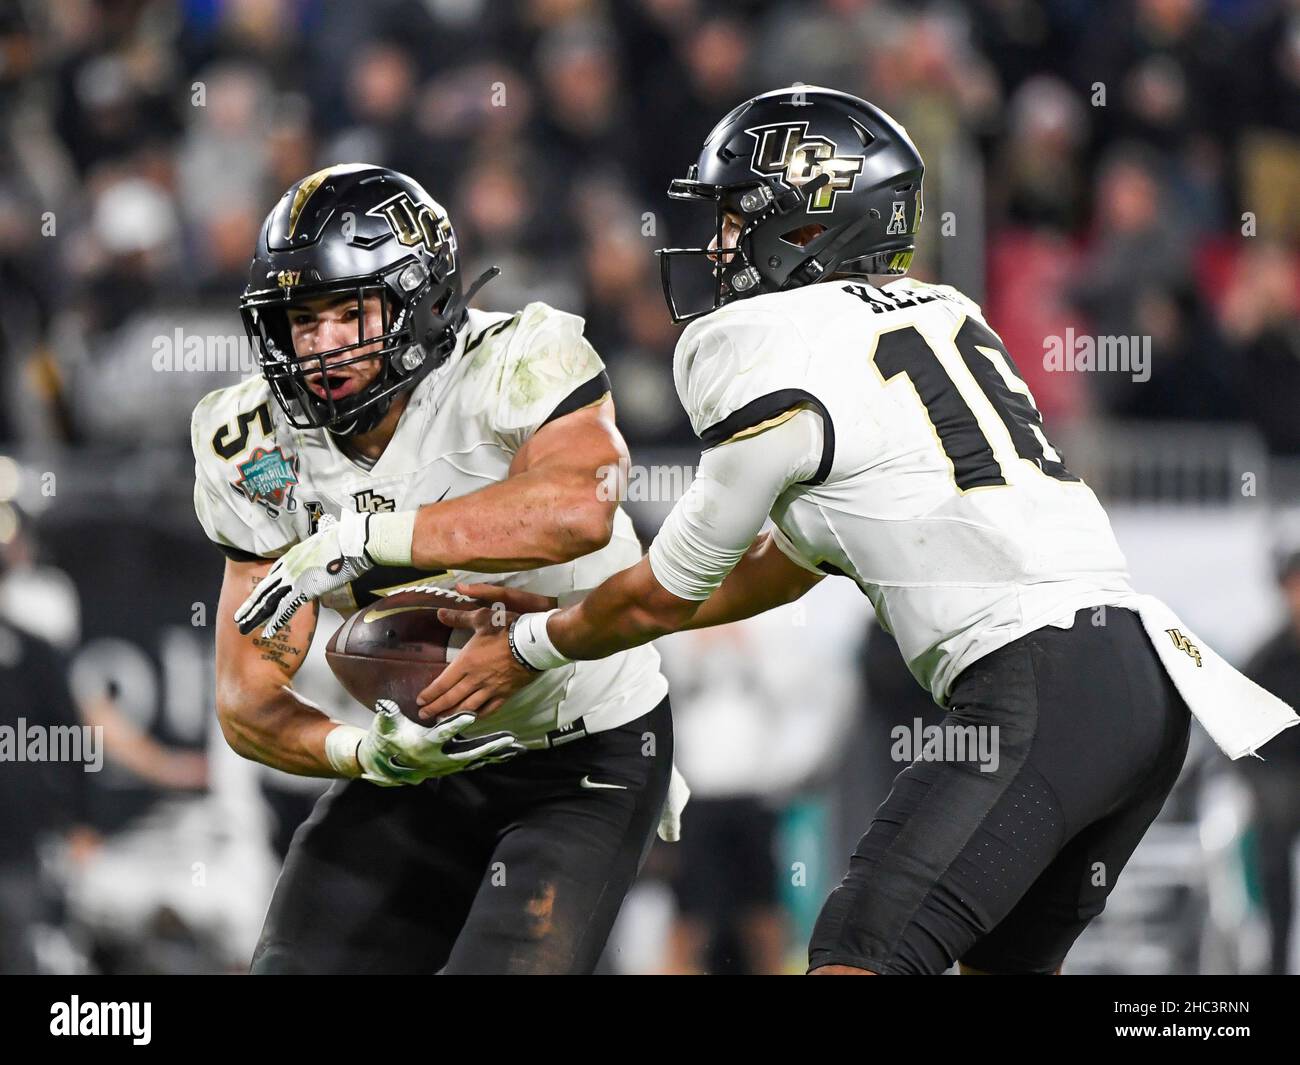 Tampa, FL, USA. 23rd Dec, 2021. UCF Knights quarterback Mikey Keene (16) hands the ball off to UCF Knights running back Isaiah Bowser (5) during the 2nd half of Union Home Mortgage Gasparilla Bowl between the Florida Gators and the UCF Knights. UCF defeated Florida 29-17 at Raymond James Stadium in Tampa, FL. Romeo T Guzman/CSM/Alamy Live News Stock Photo